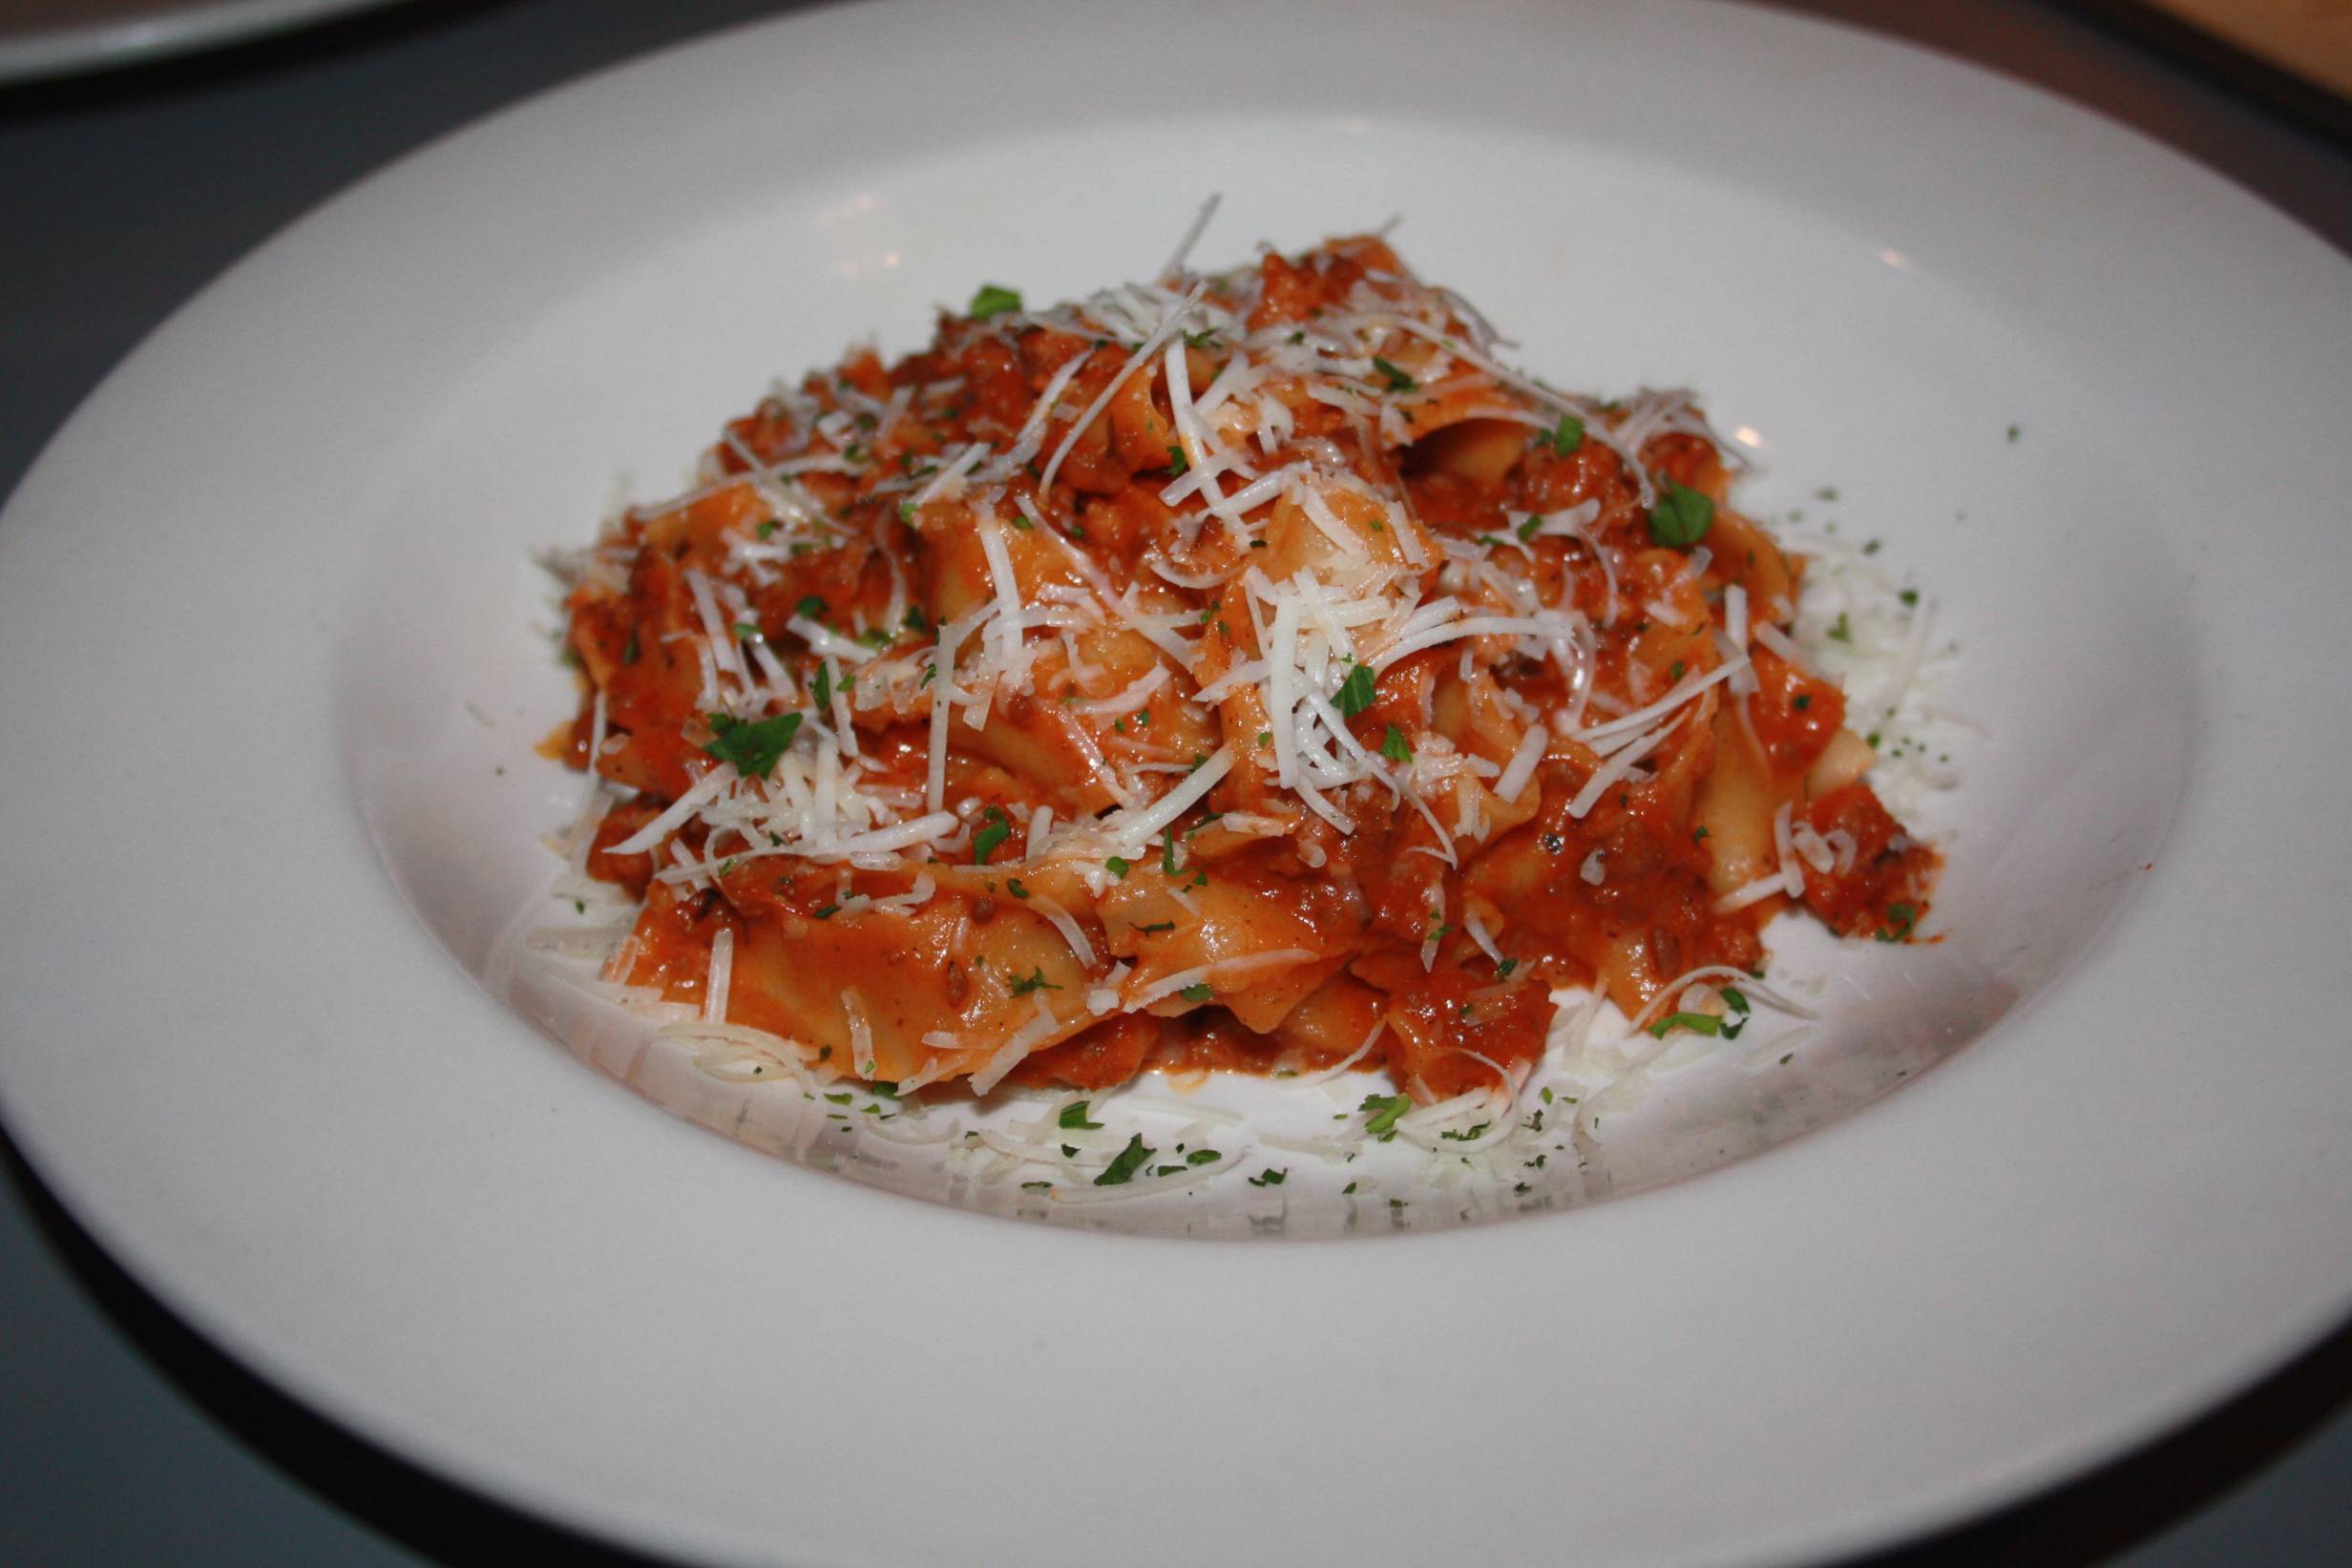 On a white plate, a pasta dish with red sauce is topped with grated parmesan. Photo by Rebecca Wells.